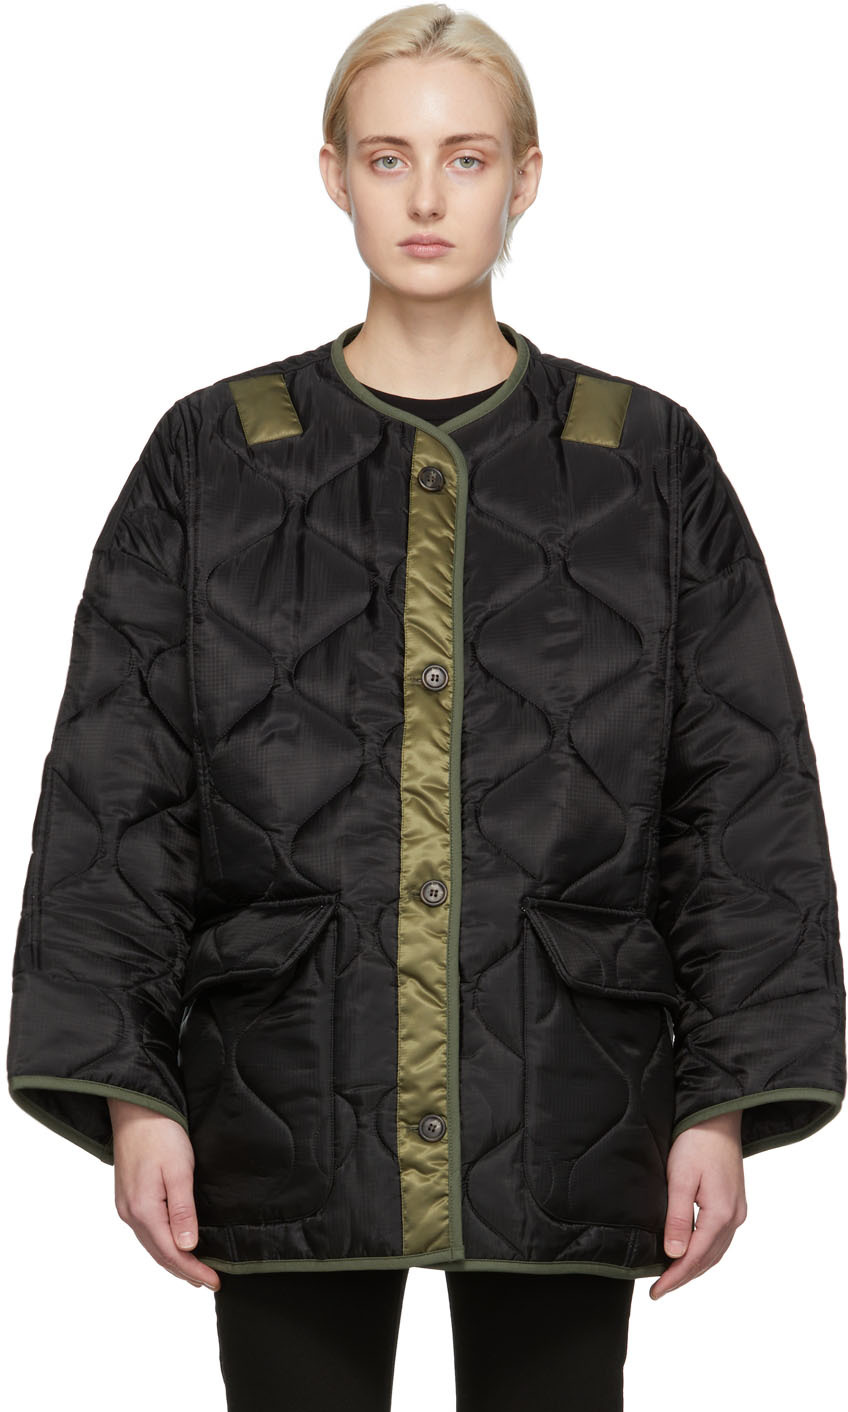 Black & Green Down Quilted Teddy Jacket by The Frankie Shop on Sale